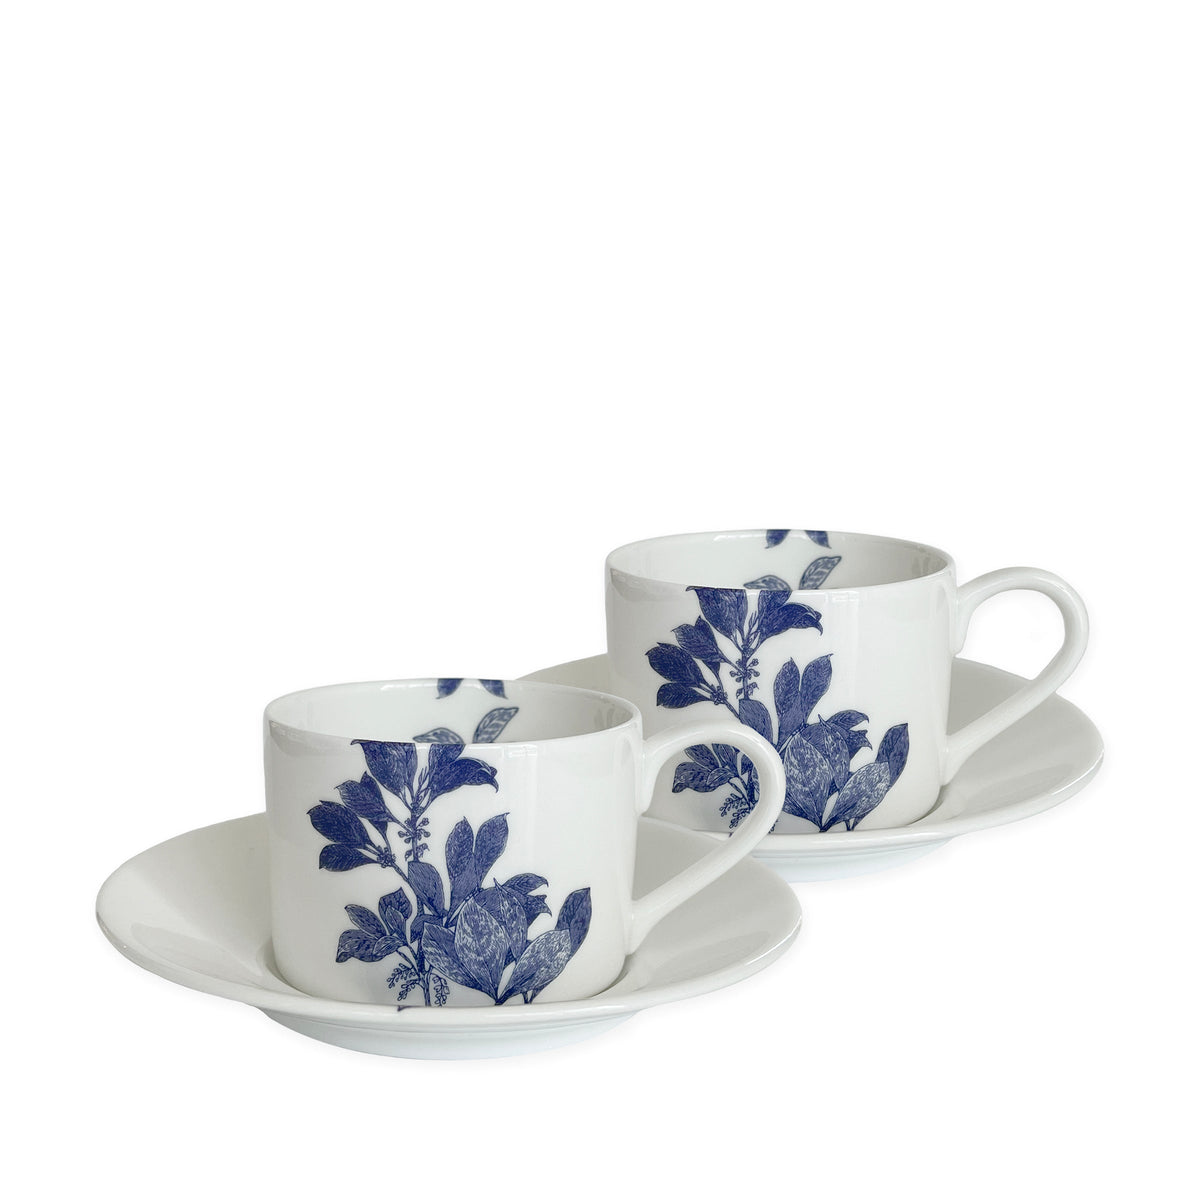 Two white bone china cups with matching saucers, decorated with blue floral patterns, are placed side by side against a white background. This elegant blue and white dinnerware, the Arbor Cups &amp; Saucers, Set of 2 from Caskata Artisanal Home, is both dishwasher and microwave safe.